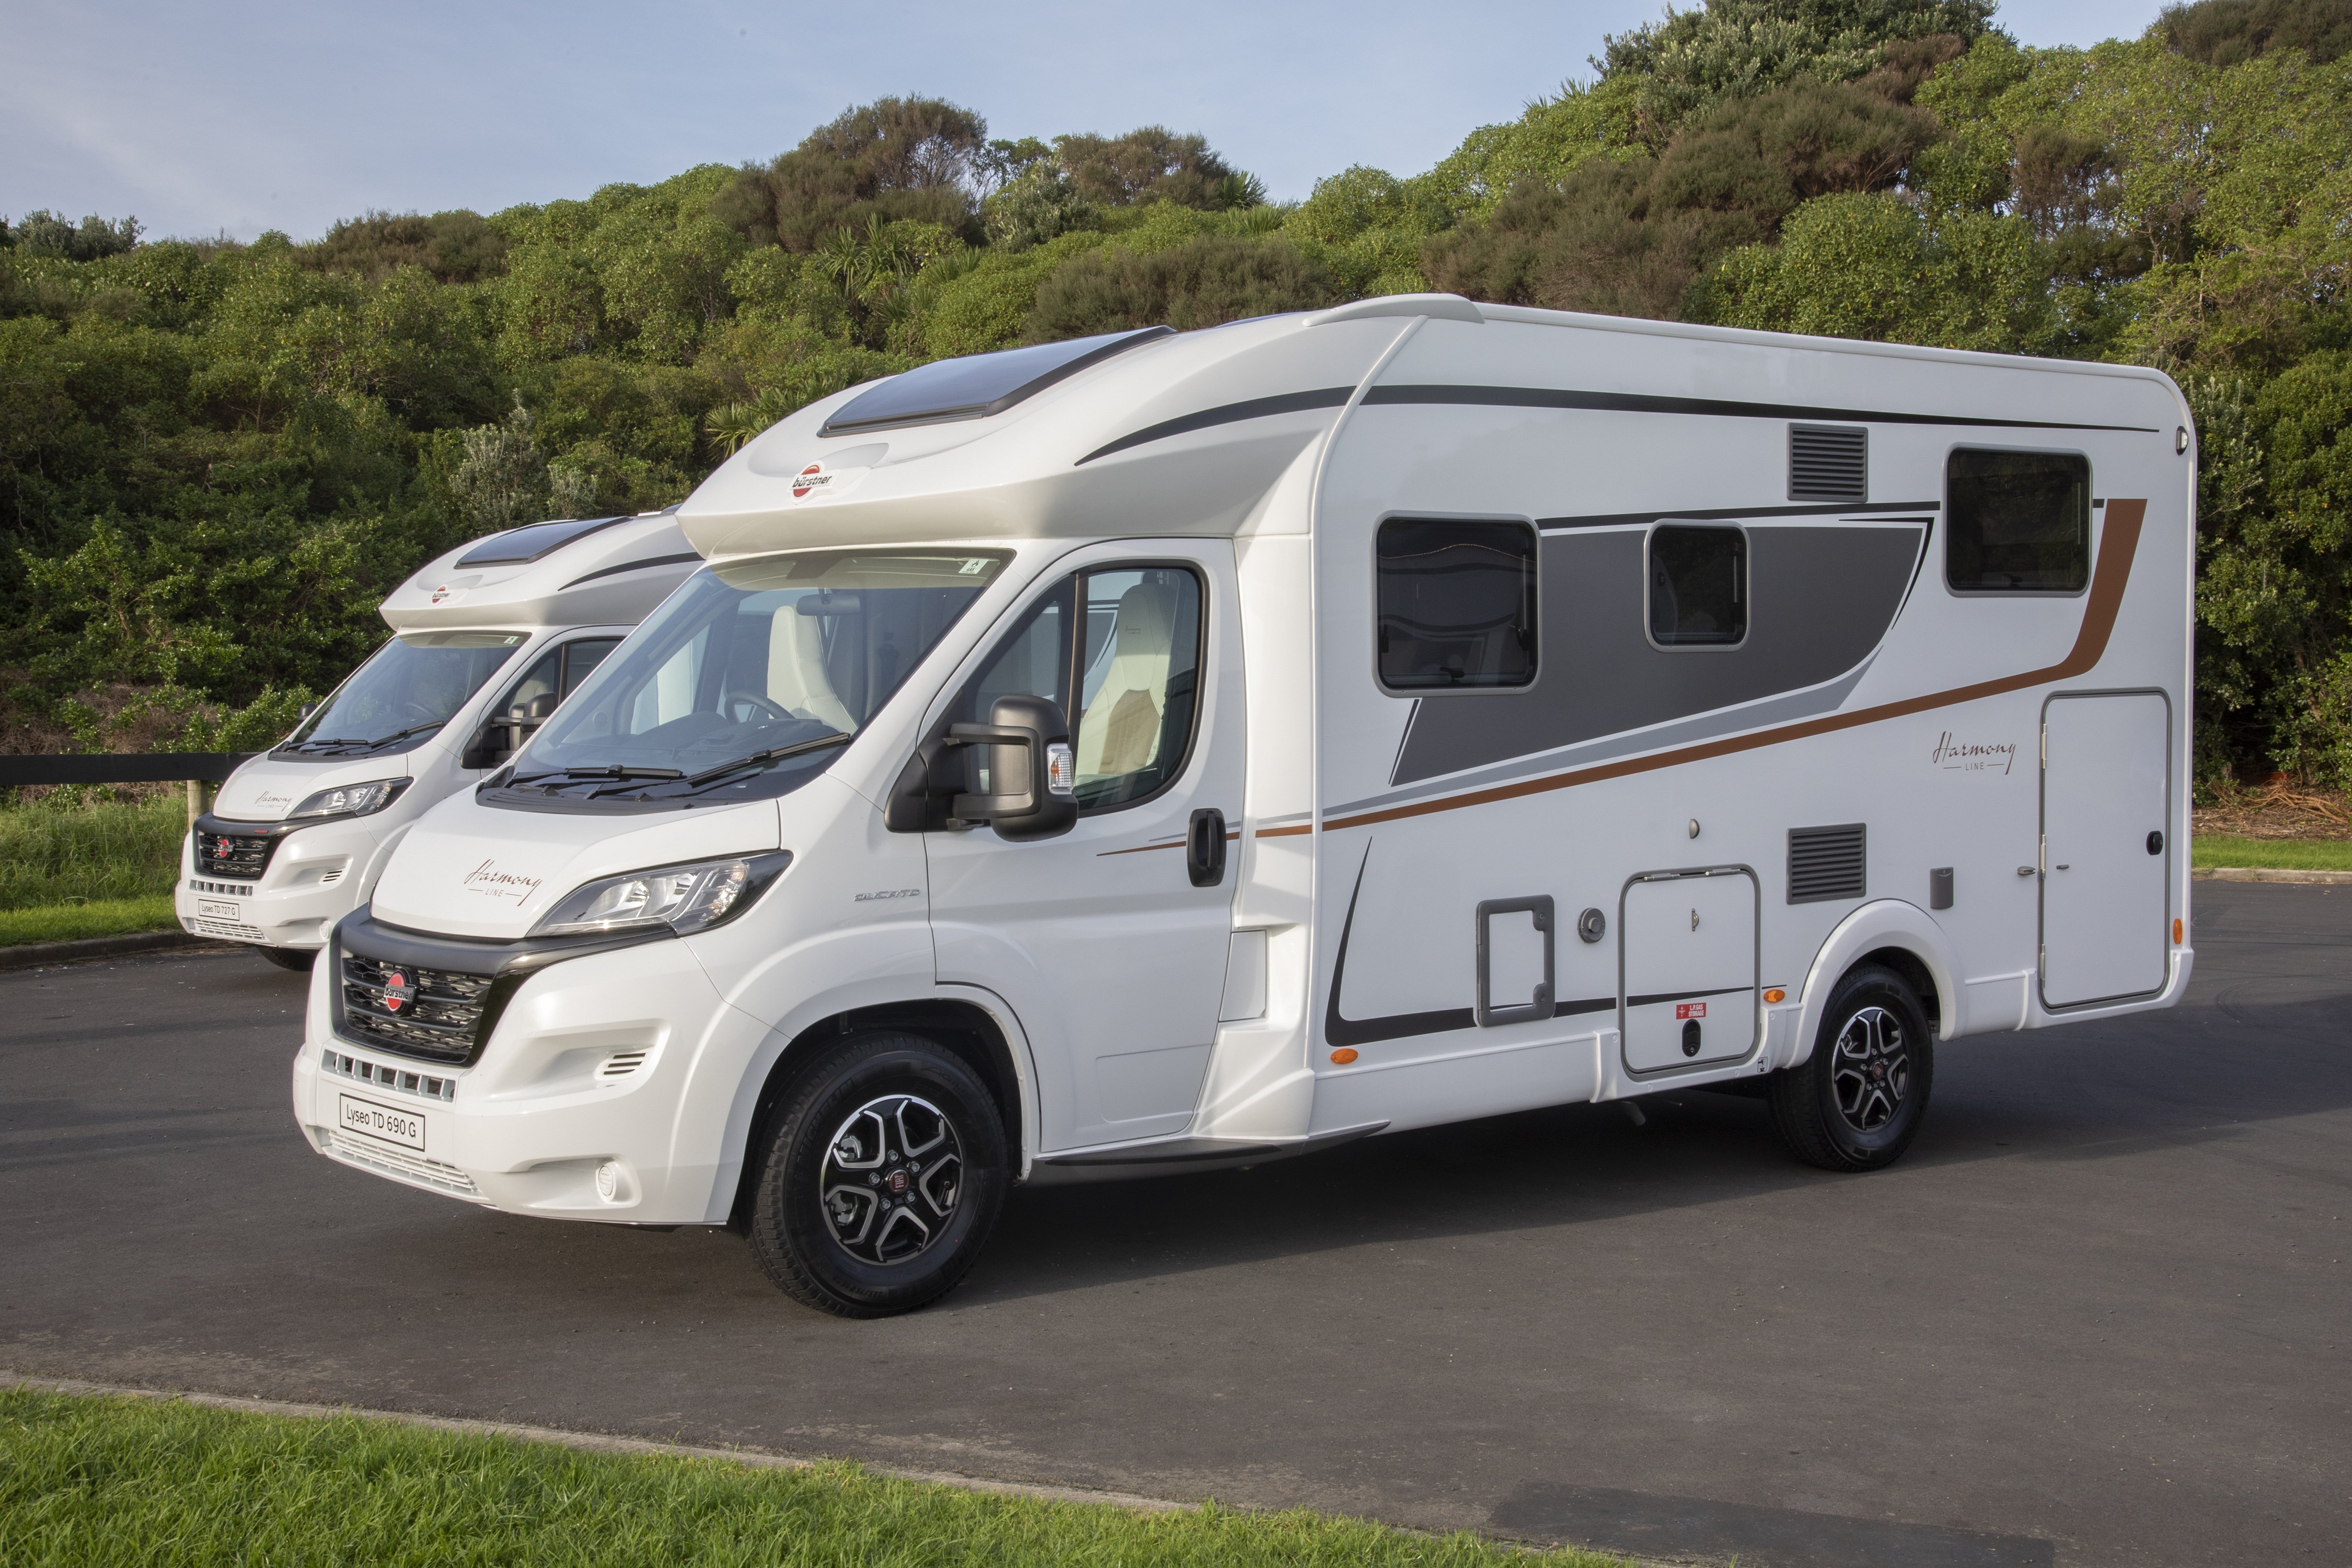 Wilderness 2022 Lyseo TD745 motorhome exterior side view